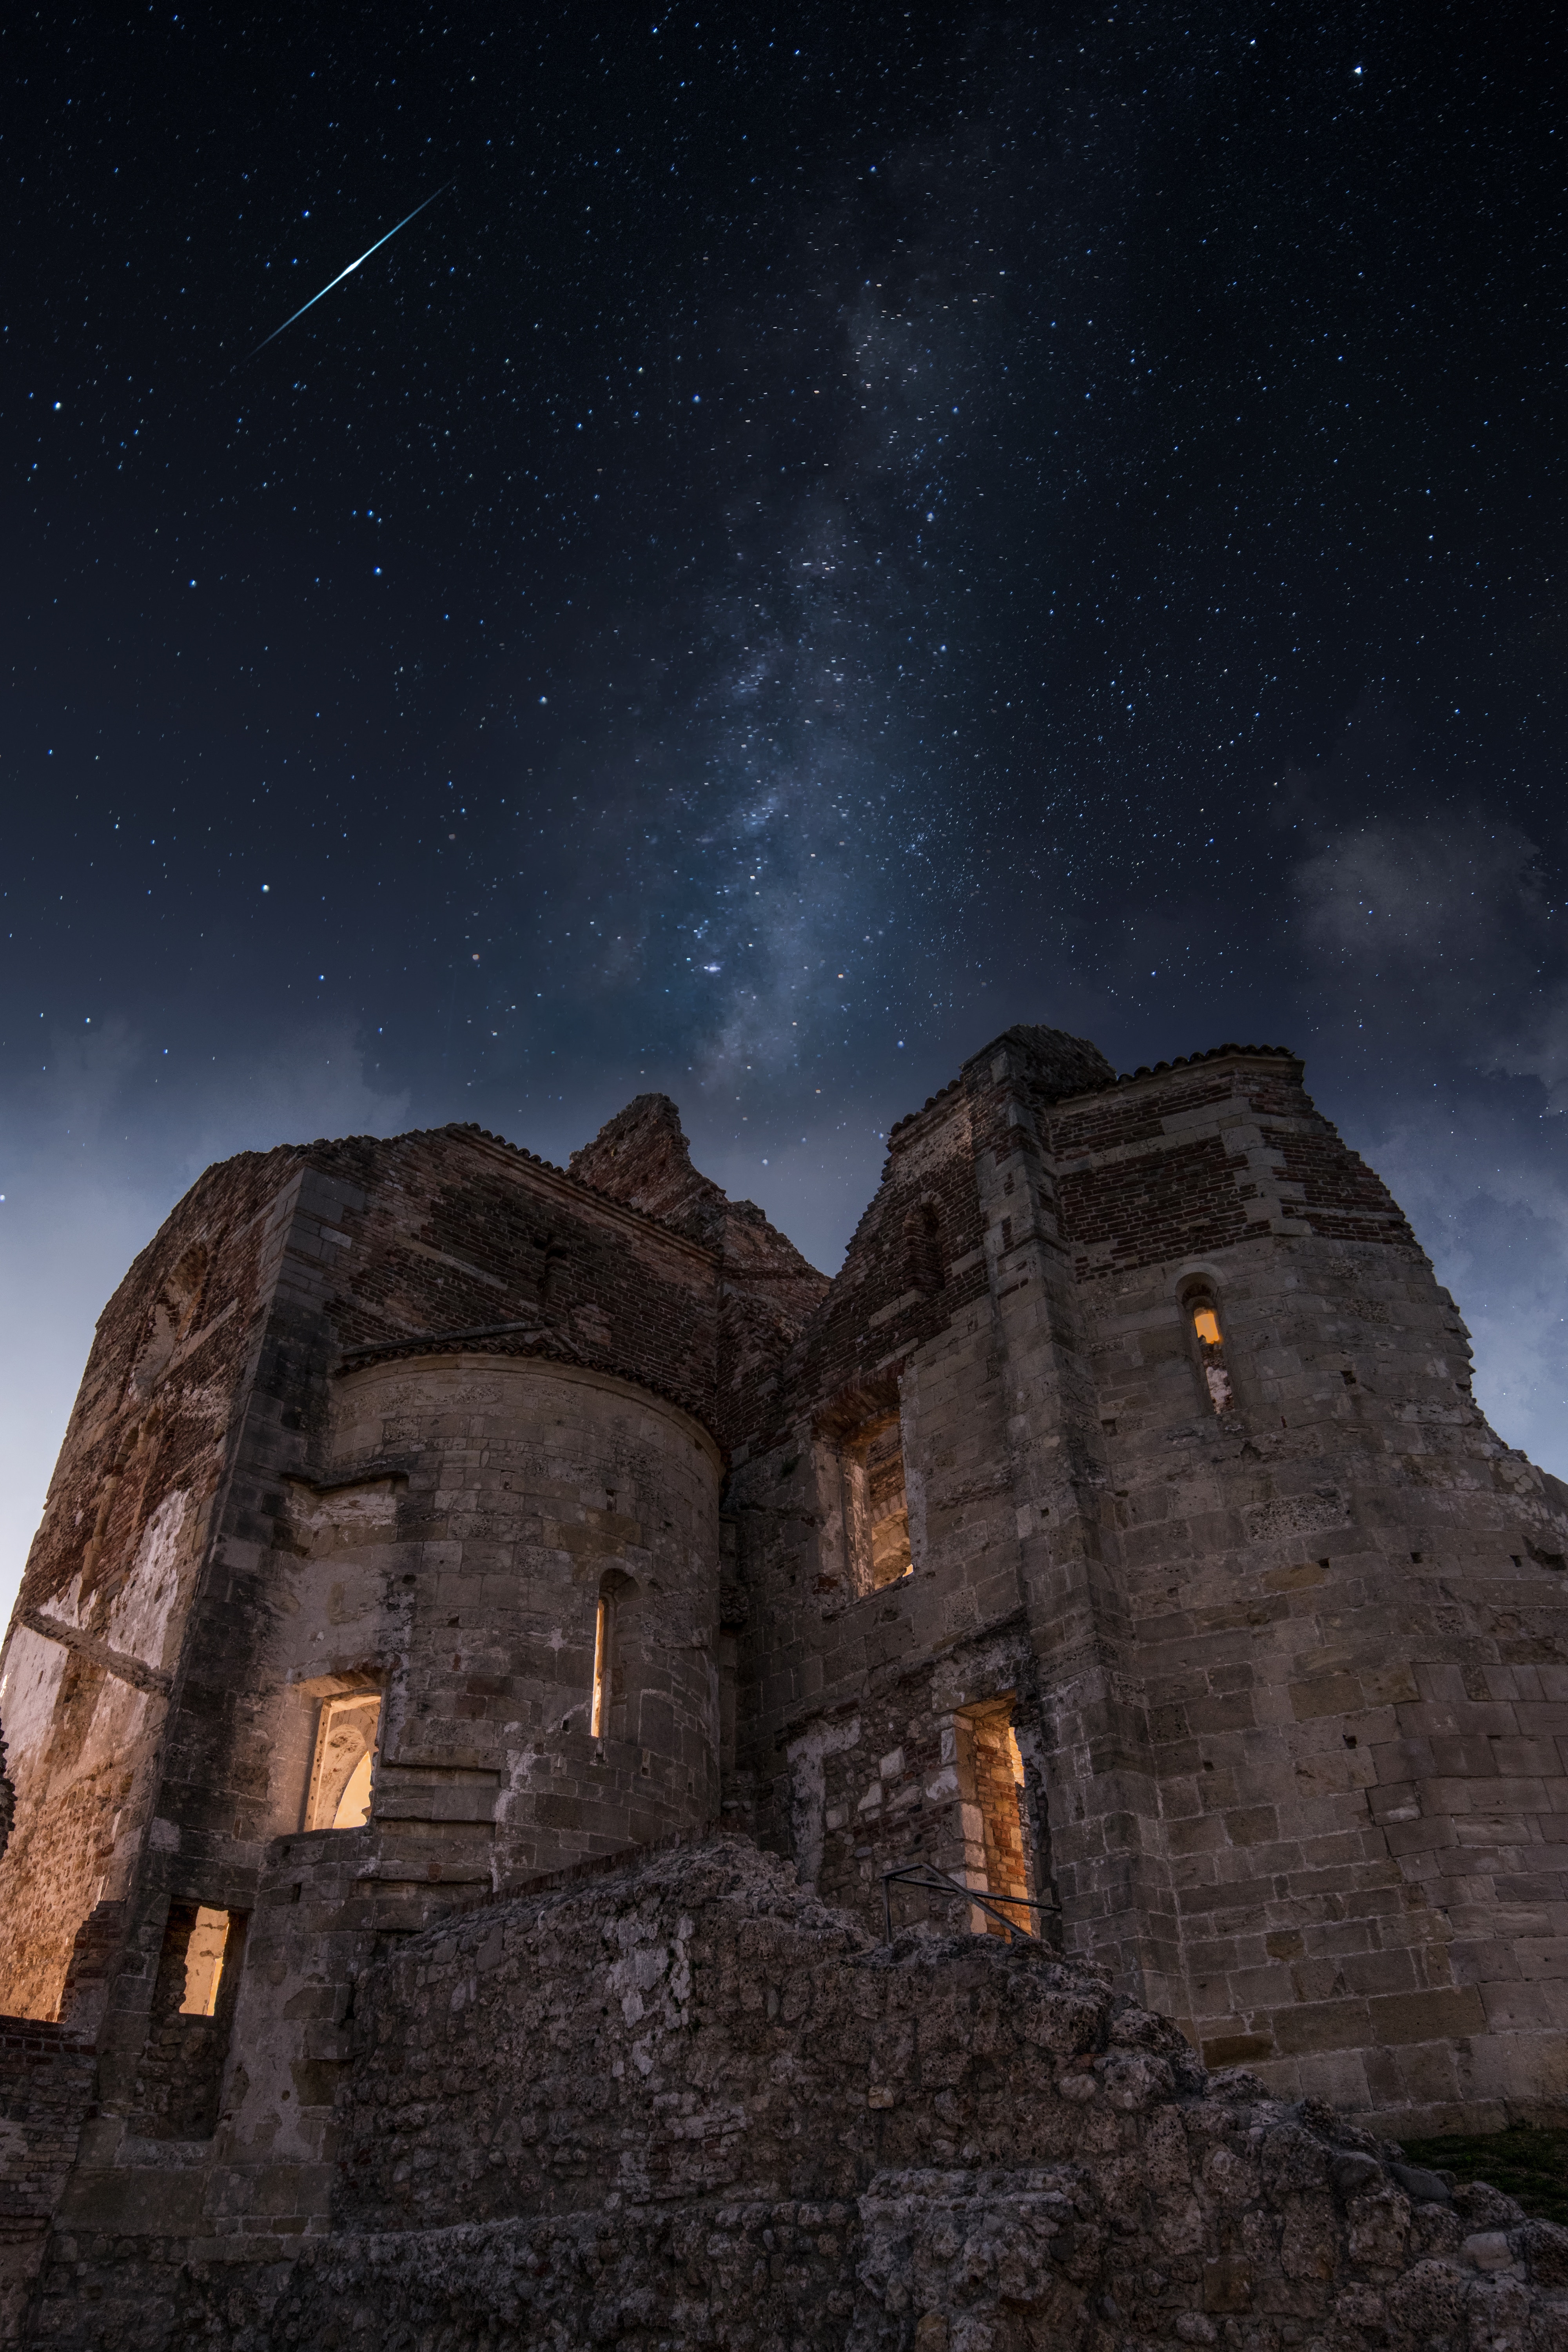 ruin, nature, architecture, italy, starry sky, ruins, veneto images